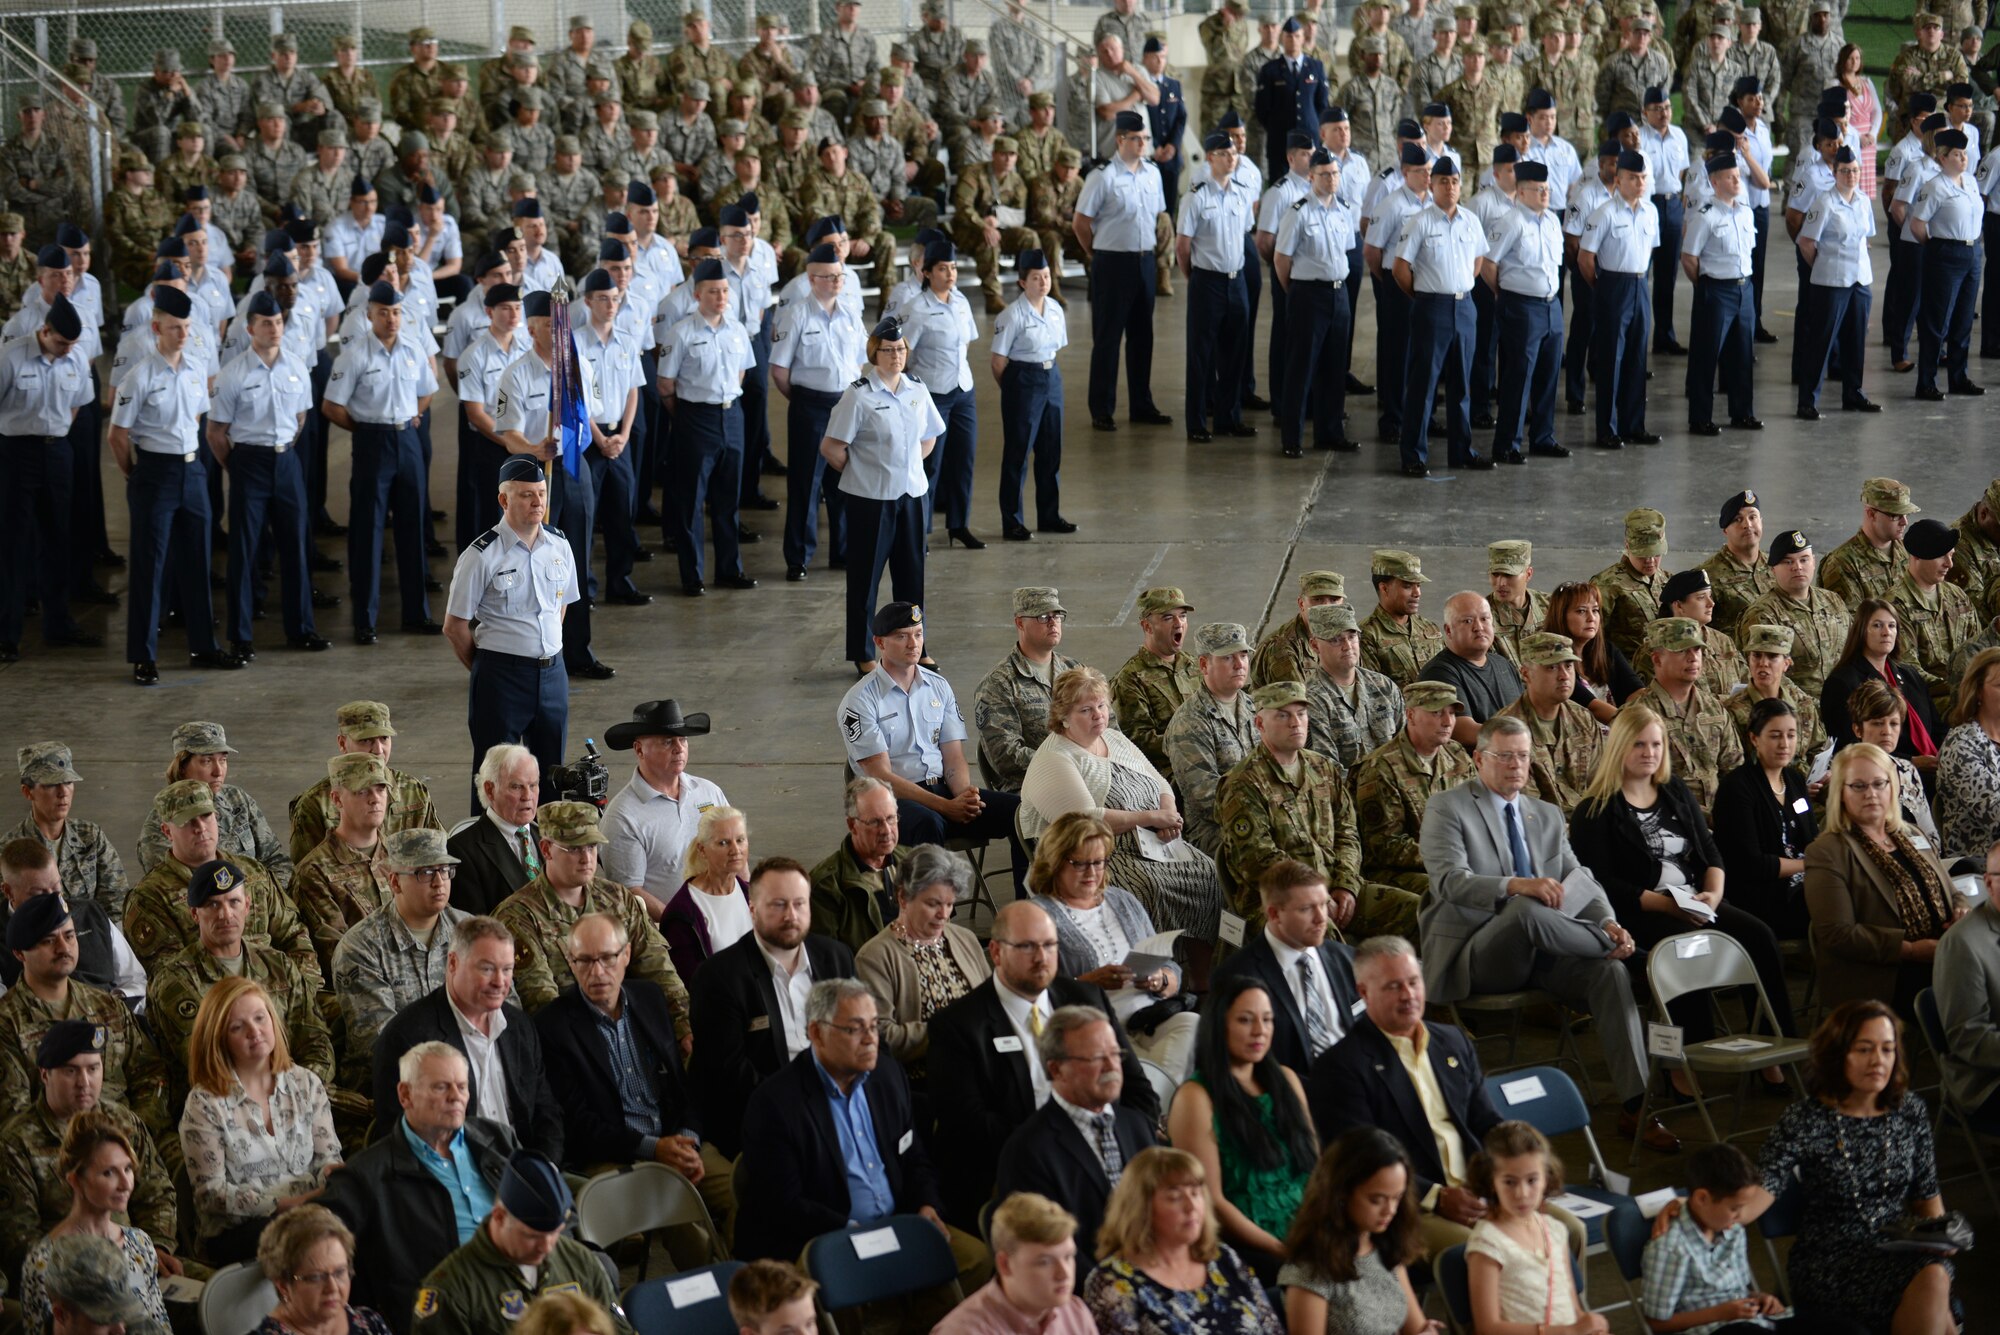 Airmen from across the 28th Bomb Wing stand in formation at the change of command ceremony held at the PRIDE Hangar on Ellsworth Air Force Base, S.D., May 30, 2019. The ceremony is a time-honored military tradition that serves as representation of the exchange of responsibility and authority from one commander to another. (U.S Air Force photo by Master Sgt. Kenya Shiloh)